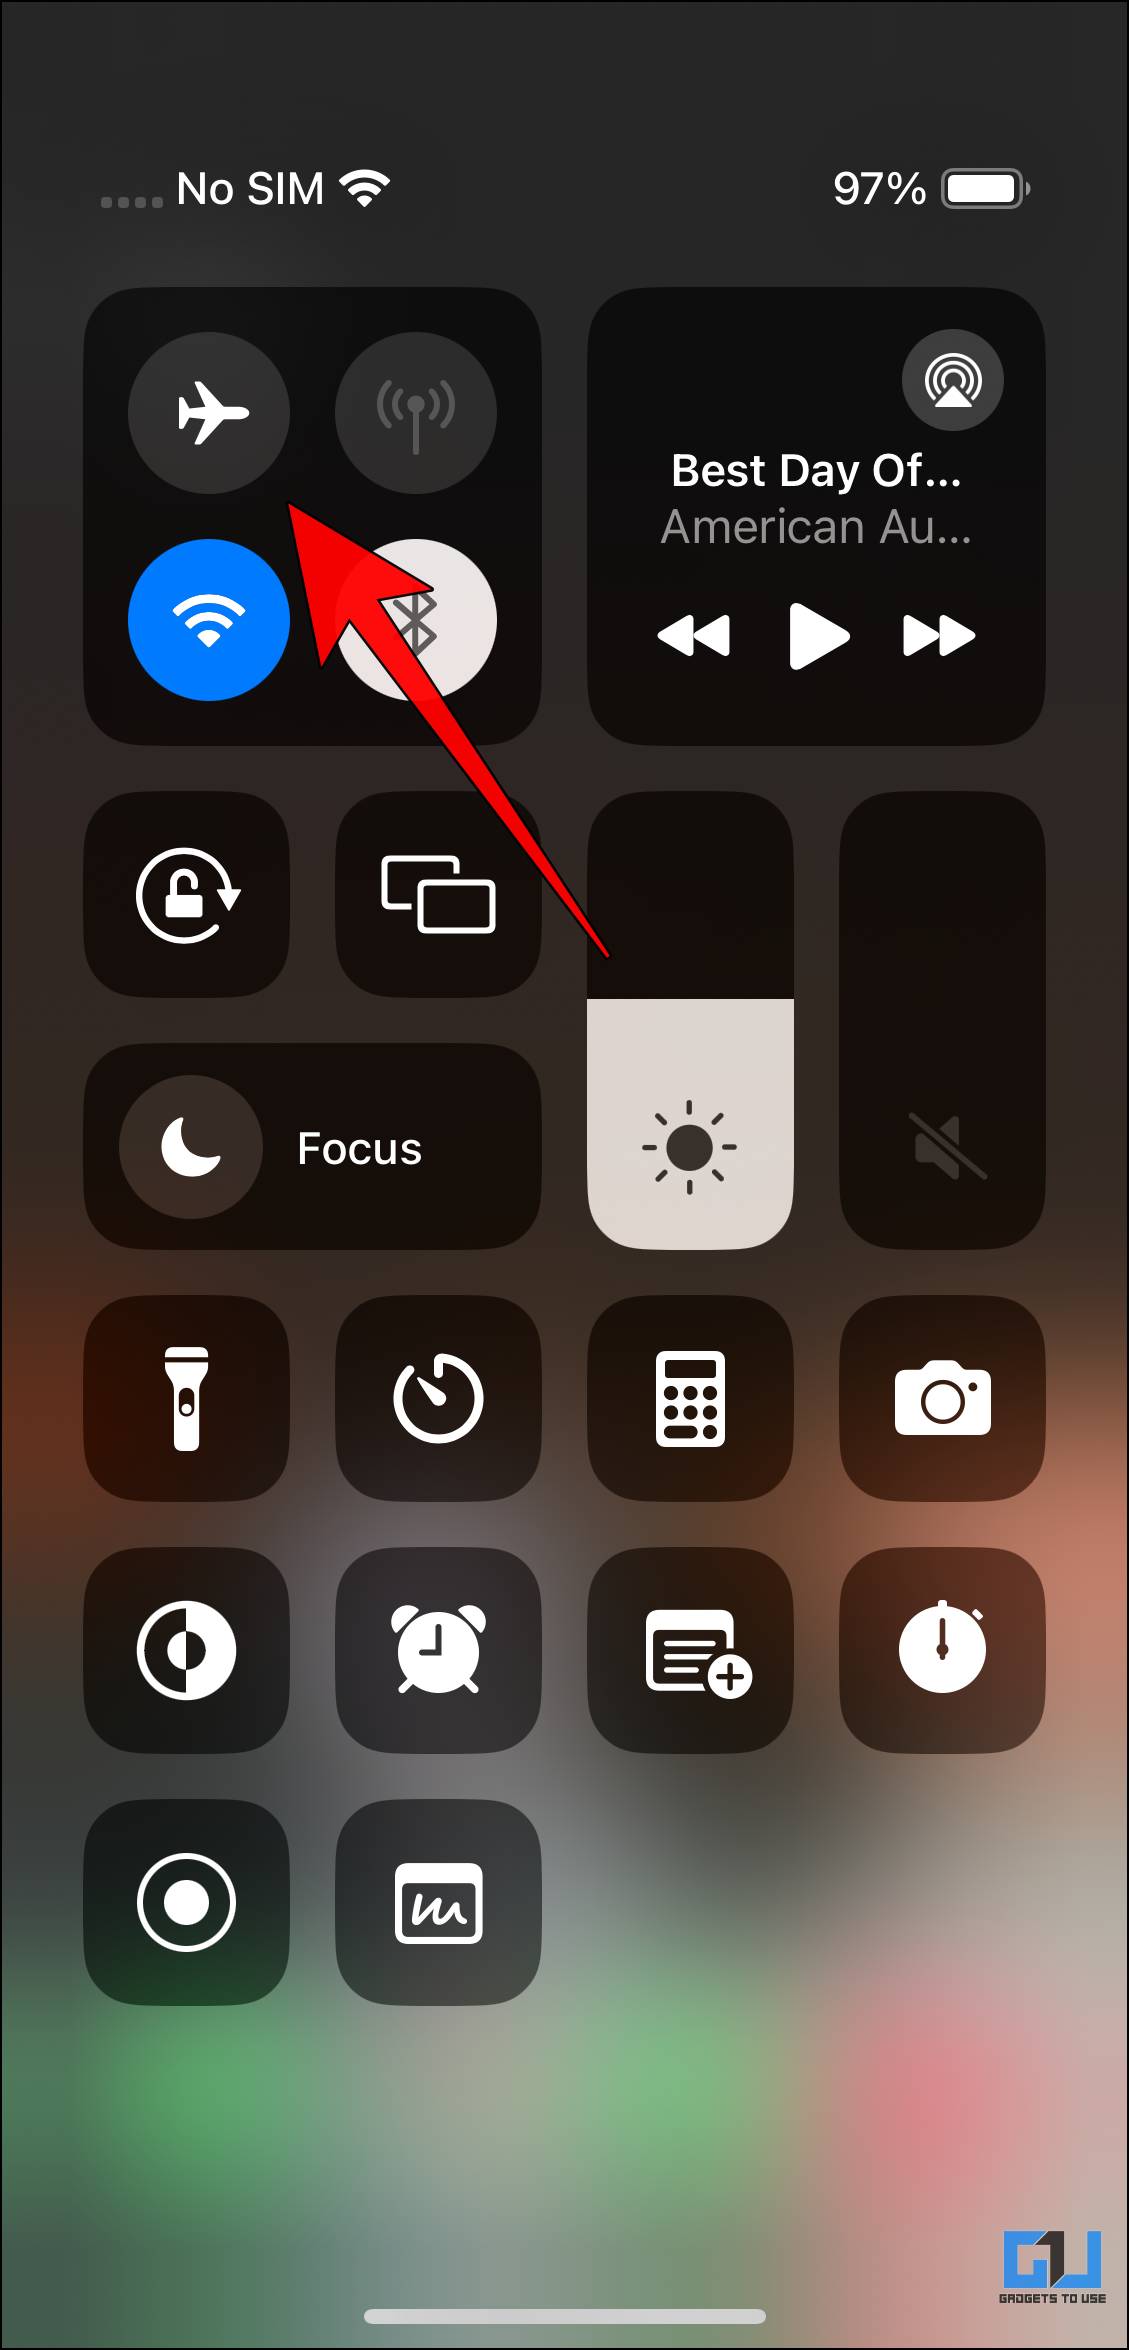 Tap on the Toggle for Airplane Mode